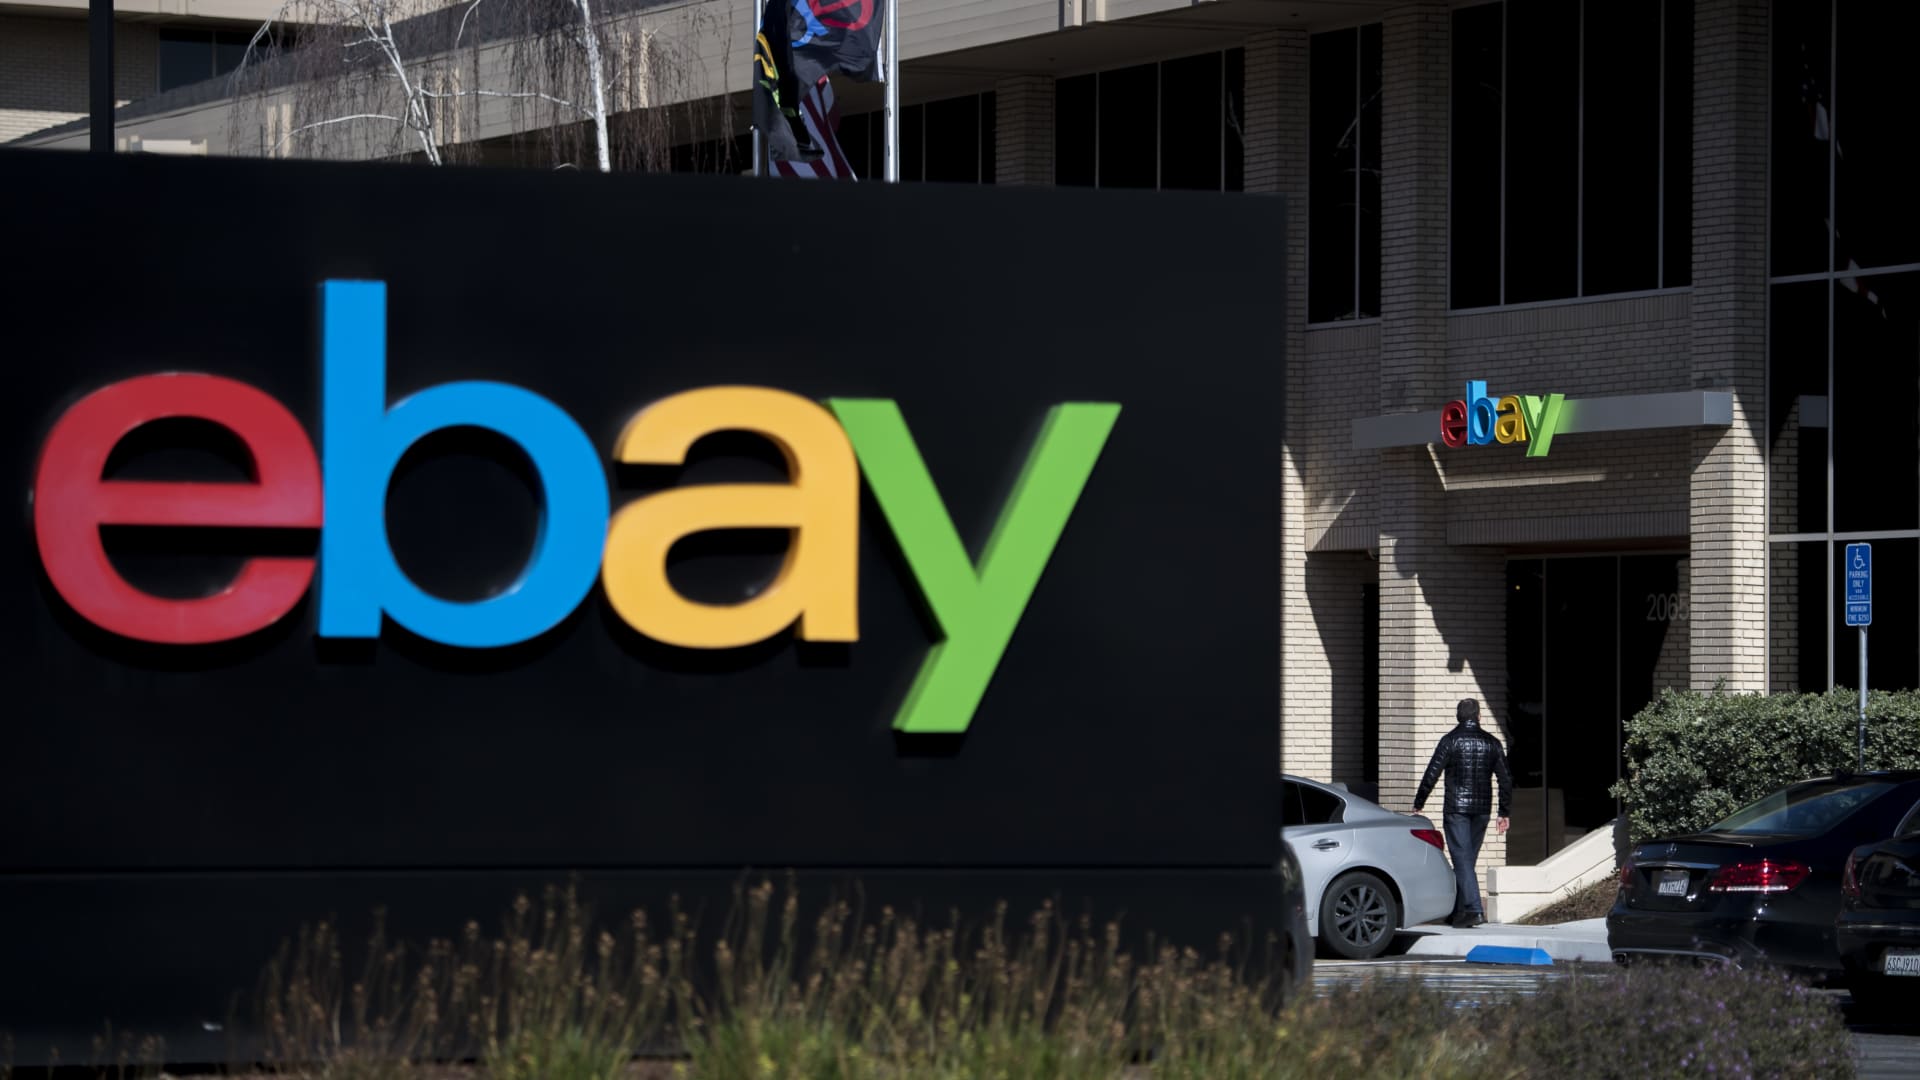 Two former eBay executives sentenced to prison for involvement in cyberstalking scheme